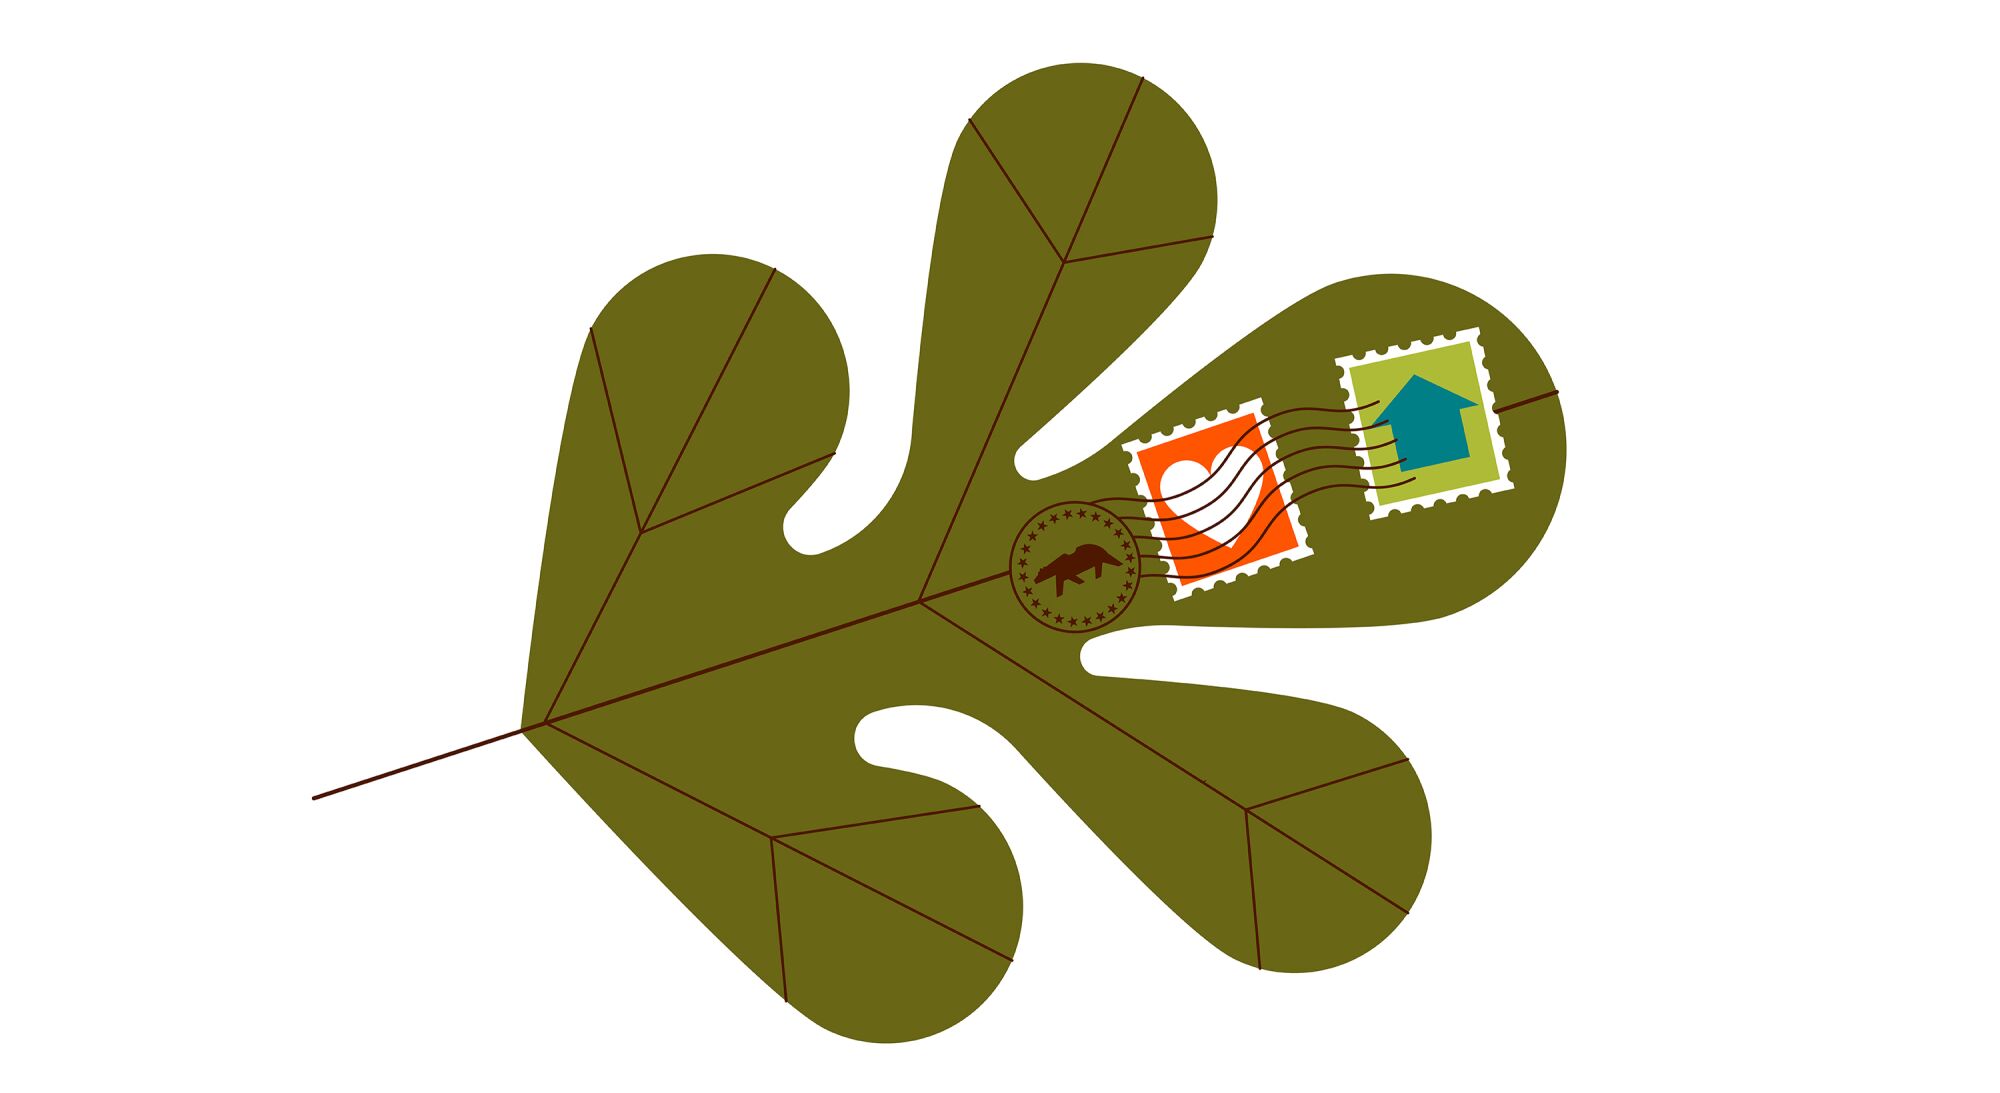 Close up illustration of a leaf with postage stamps affixed.